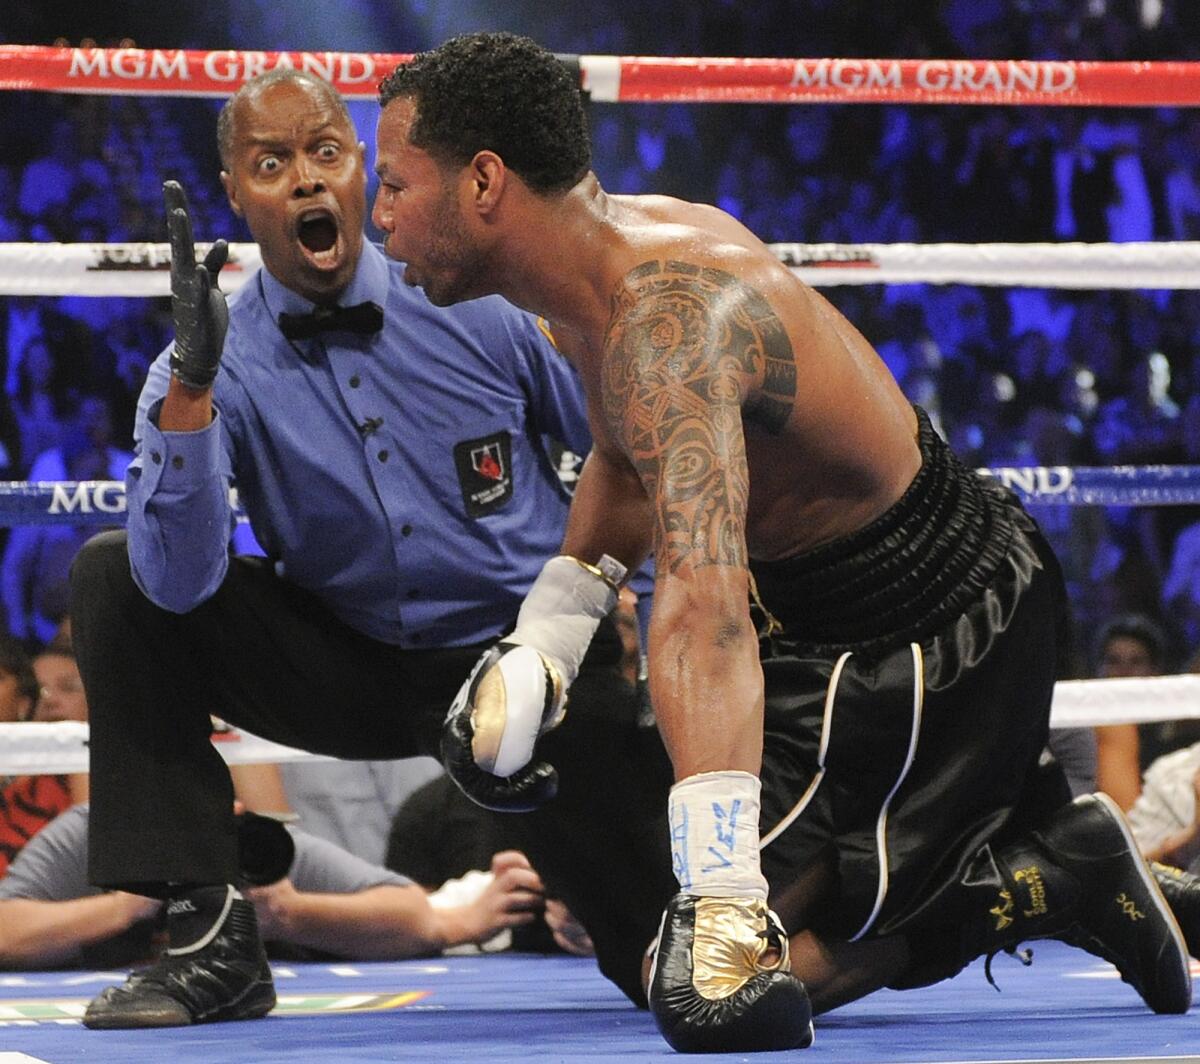 Referee Kenny Bayless issues the count on Shane Mosley, who was knocked down in the third round by Manny Pacquiao on May 7, 2011.